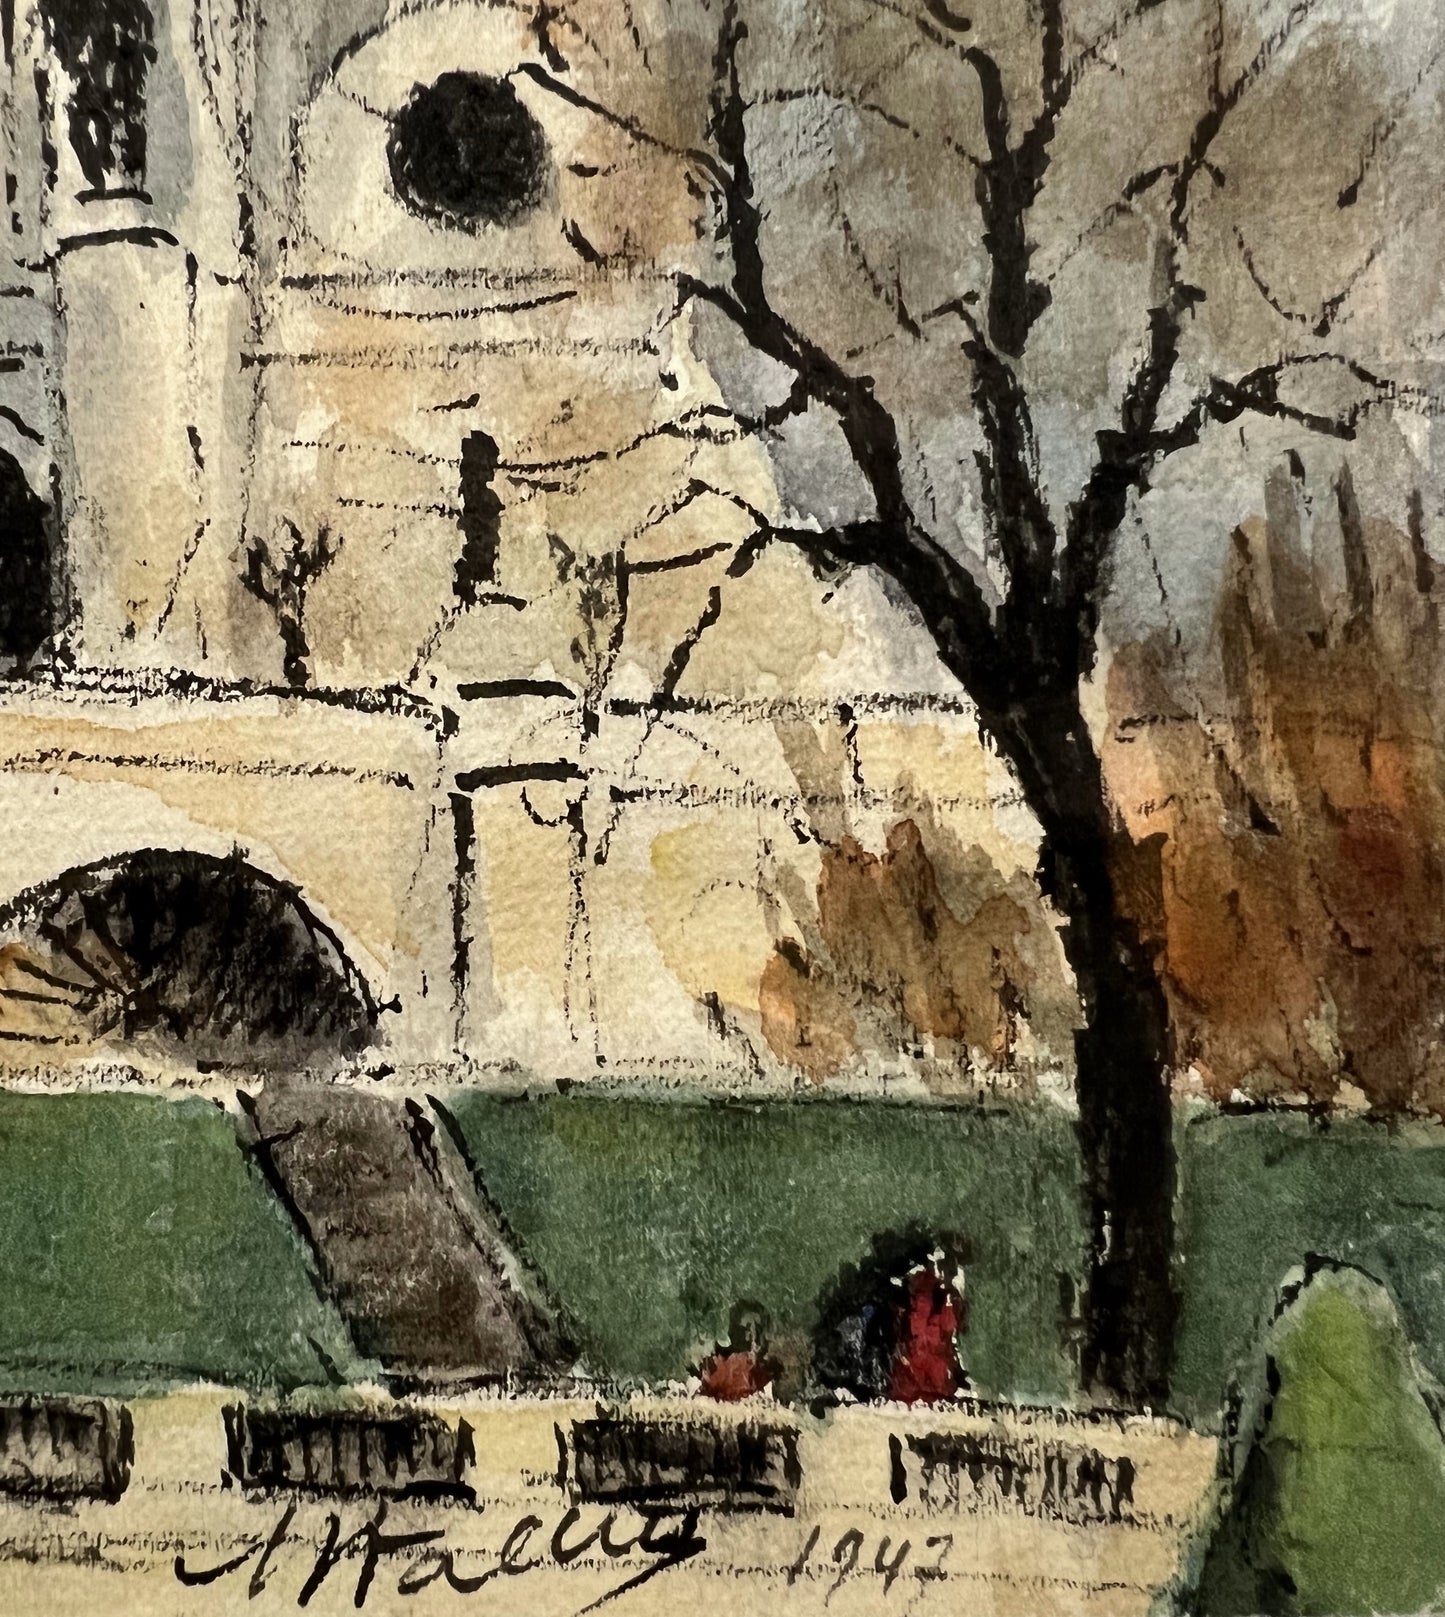 Sacre Coeur and Montmartre (8.5" x 10.75")